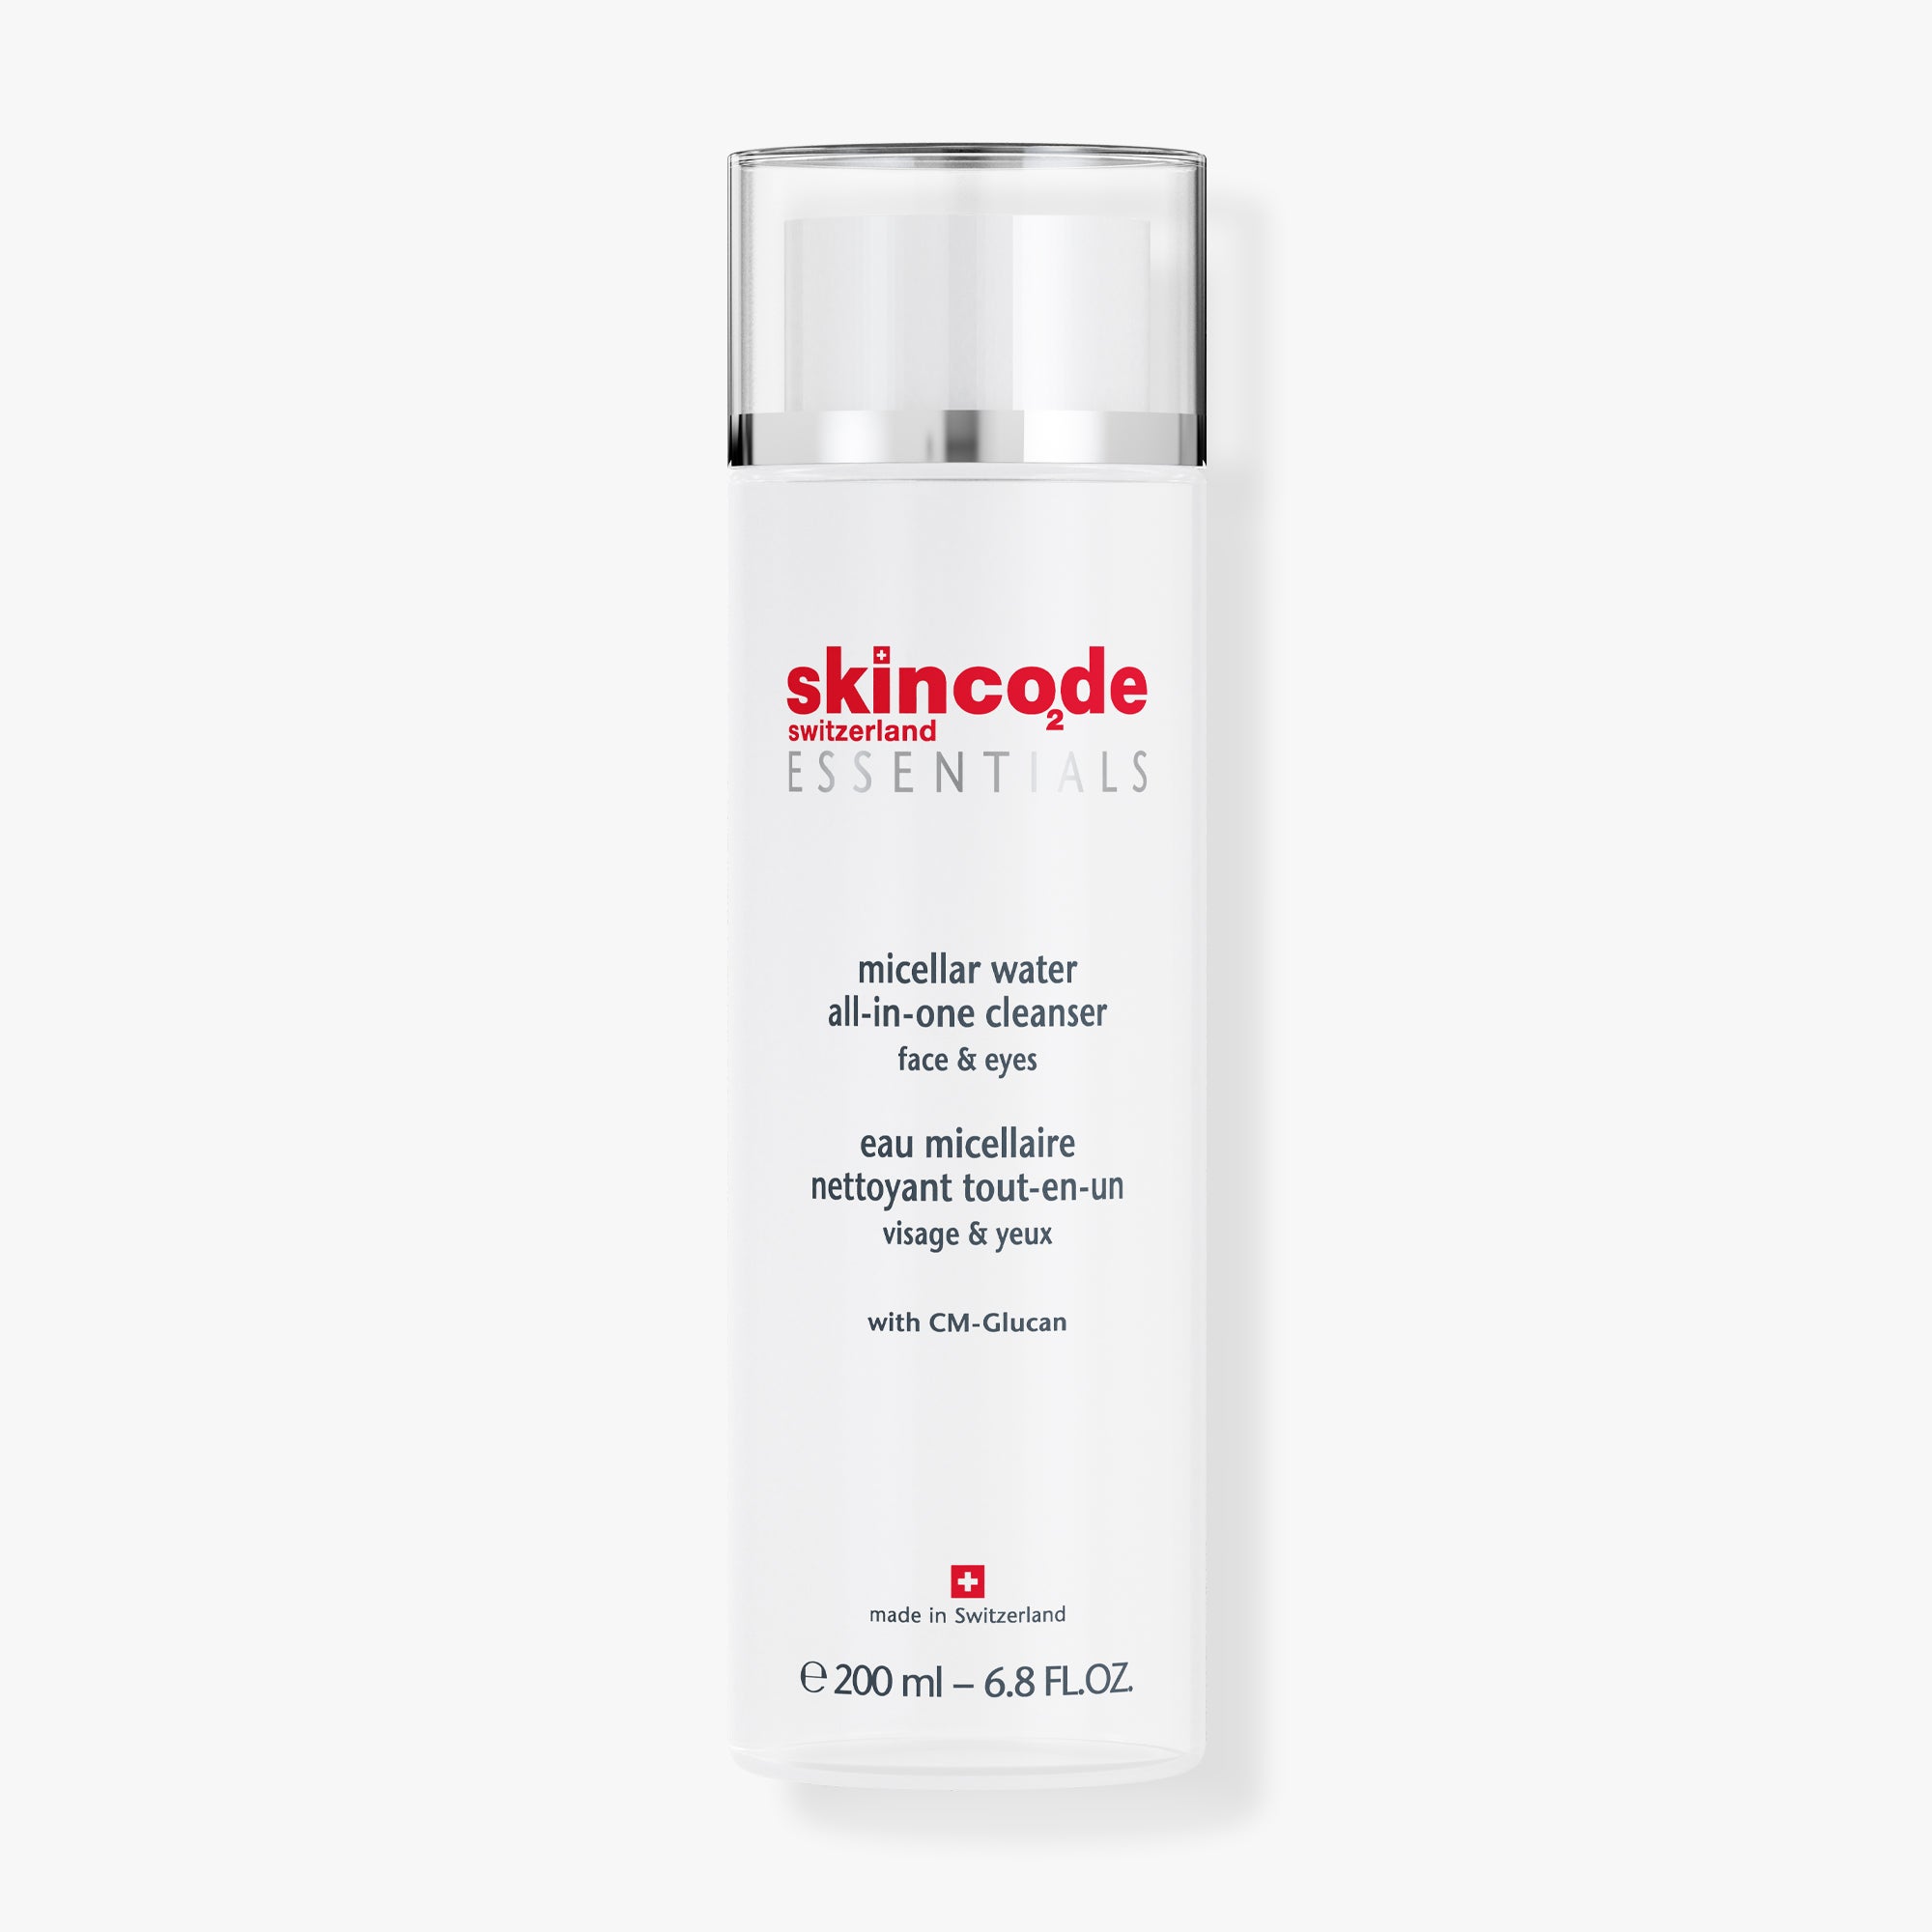 SkinCode Essentials, Micellar Water All-in-One Cleanser